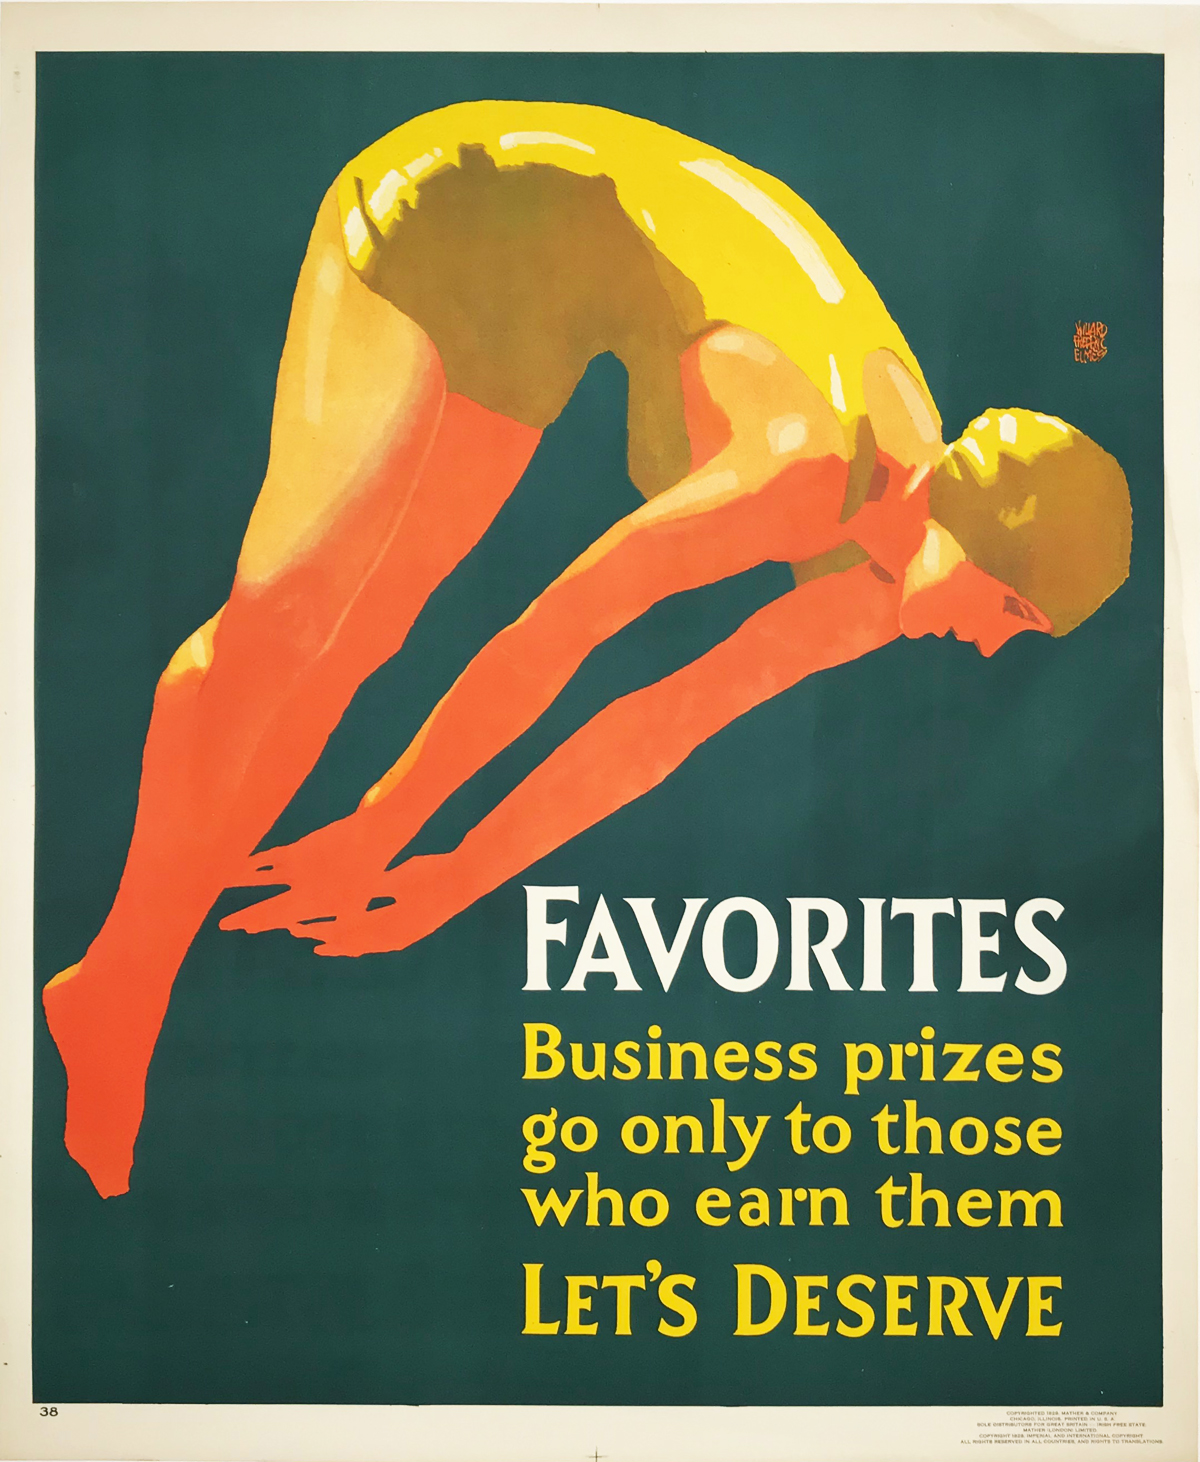 Favorites original vintage poster from Mather work incentive series American 1929.